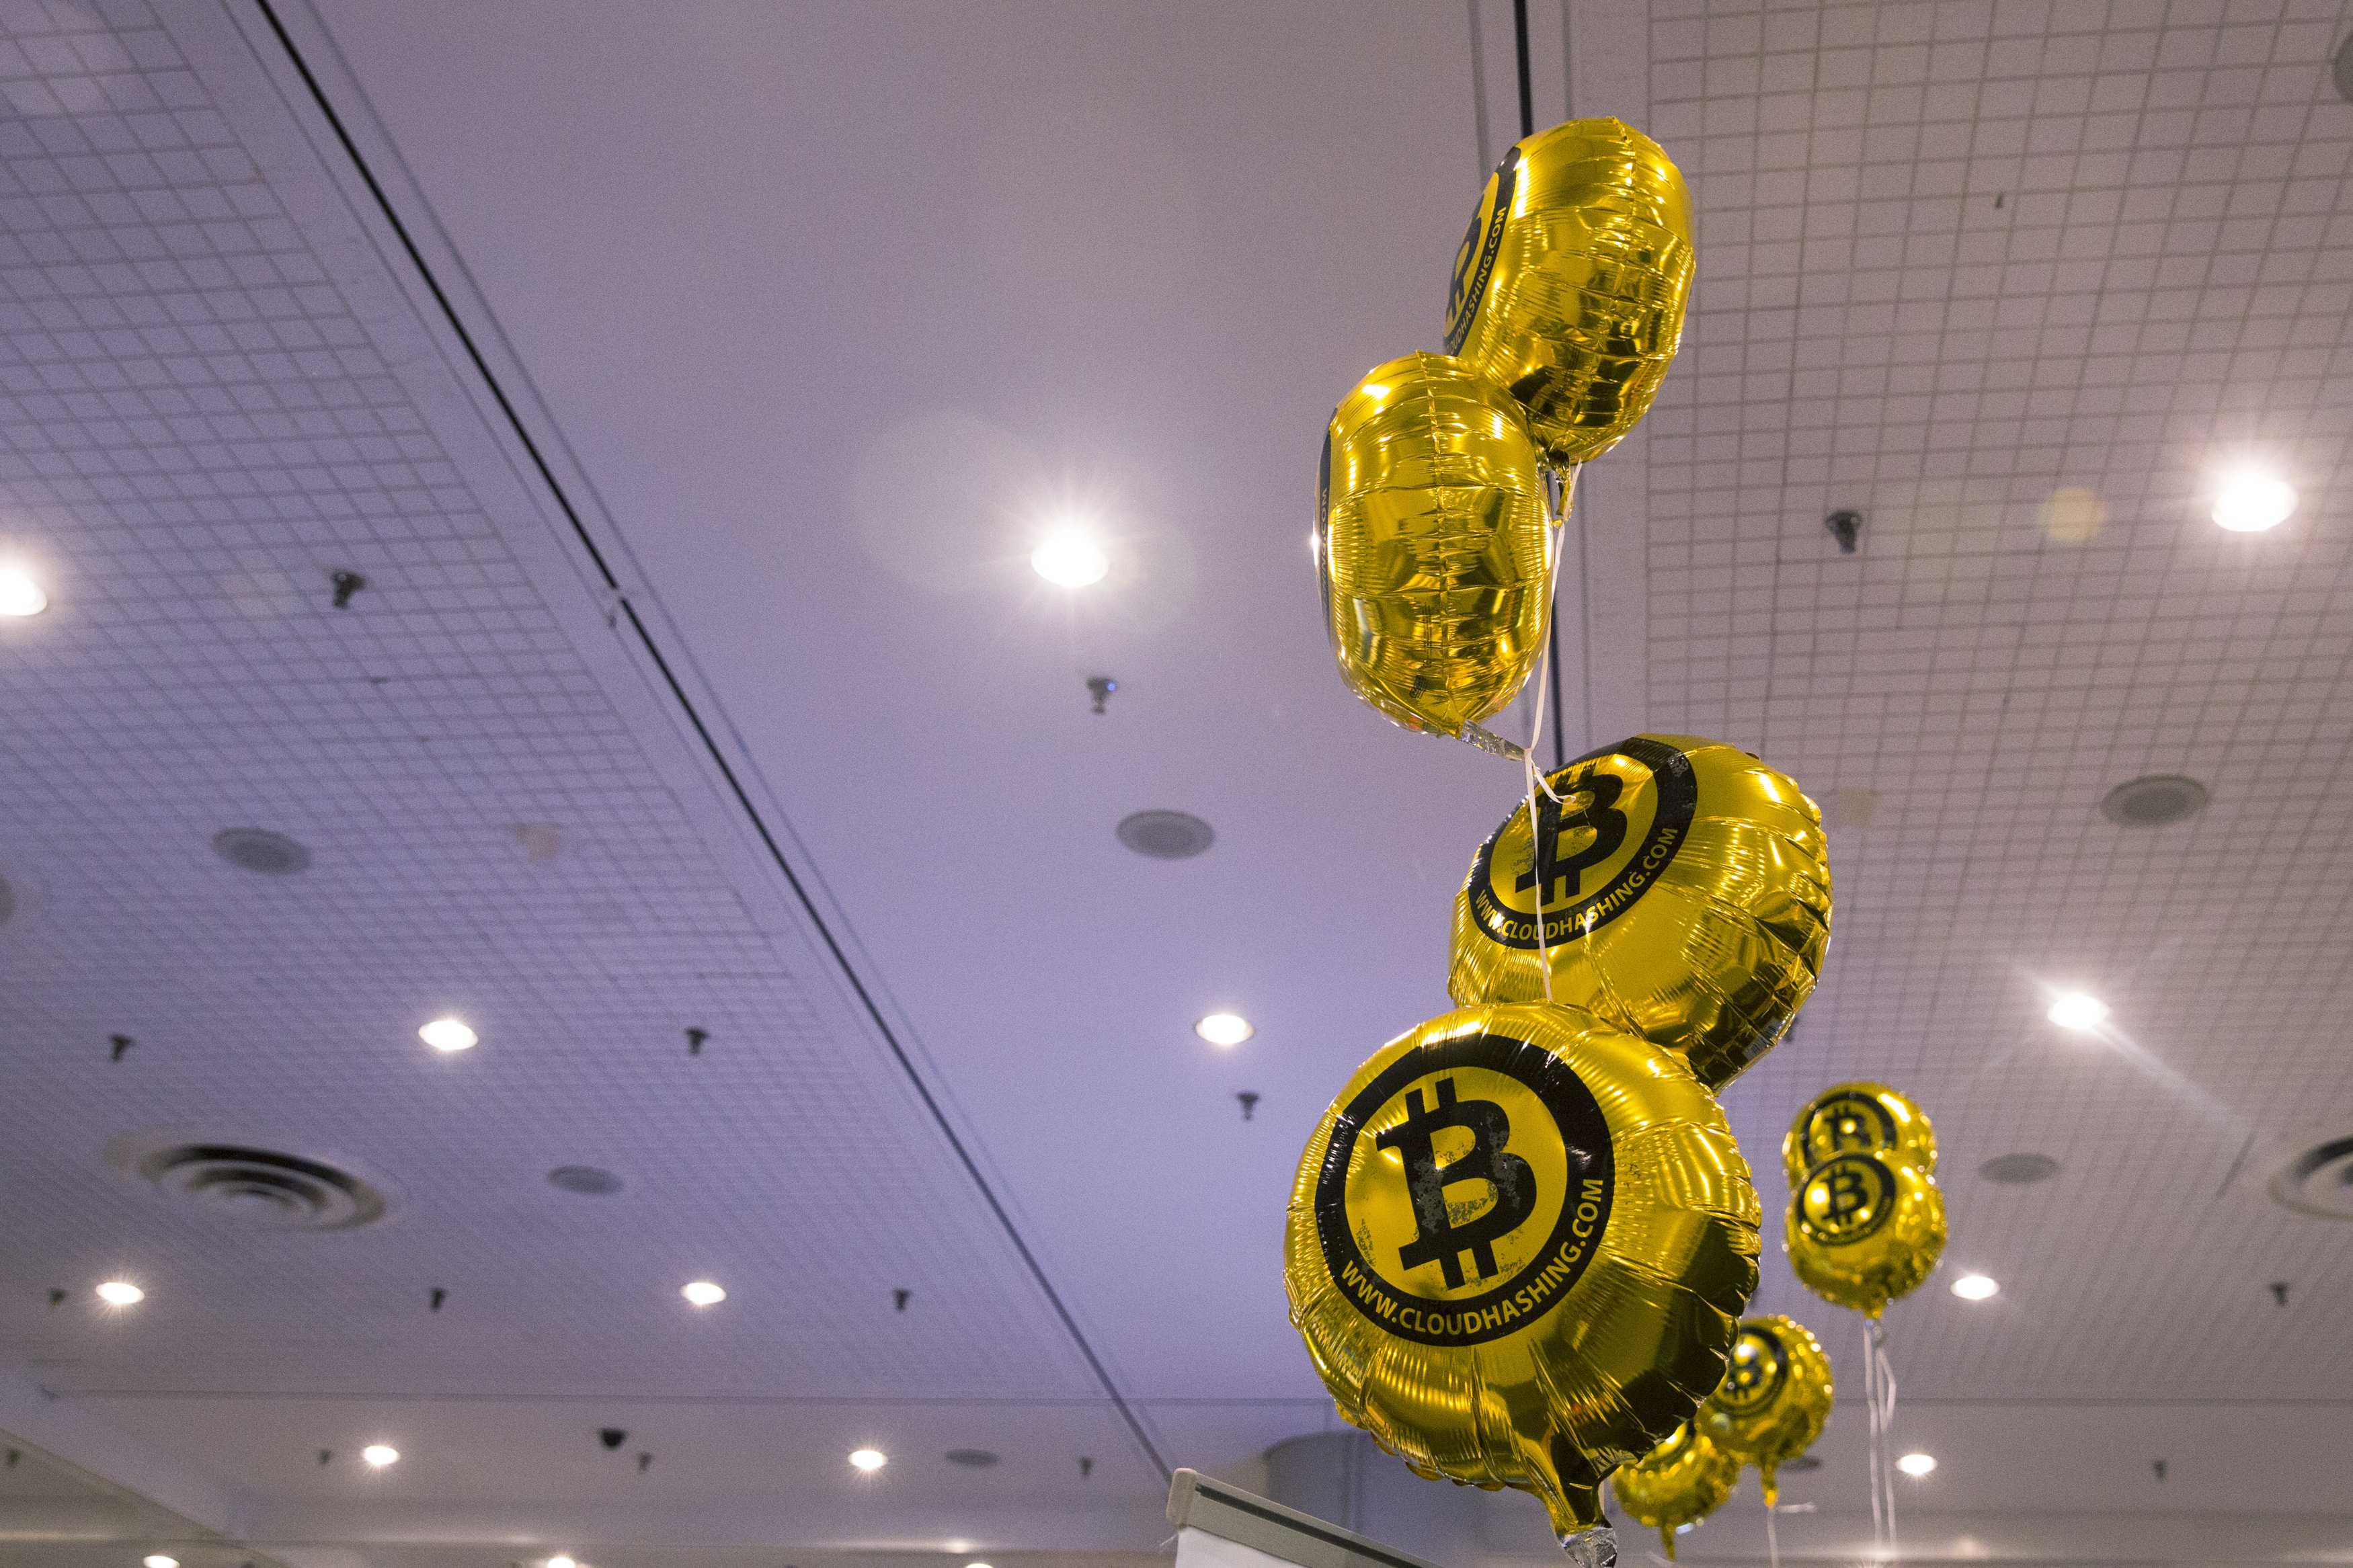 Bitcoin themed balloons float in the air during the "Inside Bitcoins: The Future of Virtual Currency Conference" in New York April 8, 2014. REUTERS/Lucas Jackson (UNITED STATES - Tags: BUSINESS SCIENCE TECHNOLOGY)